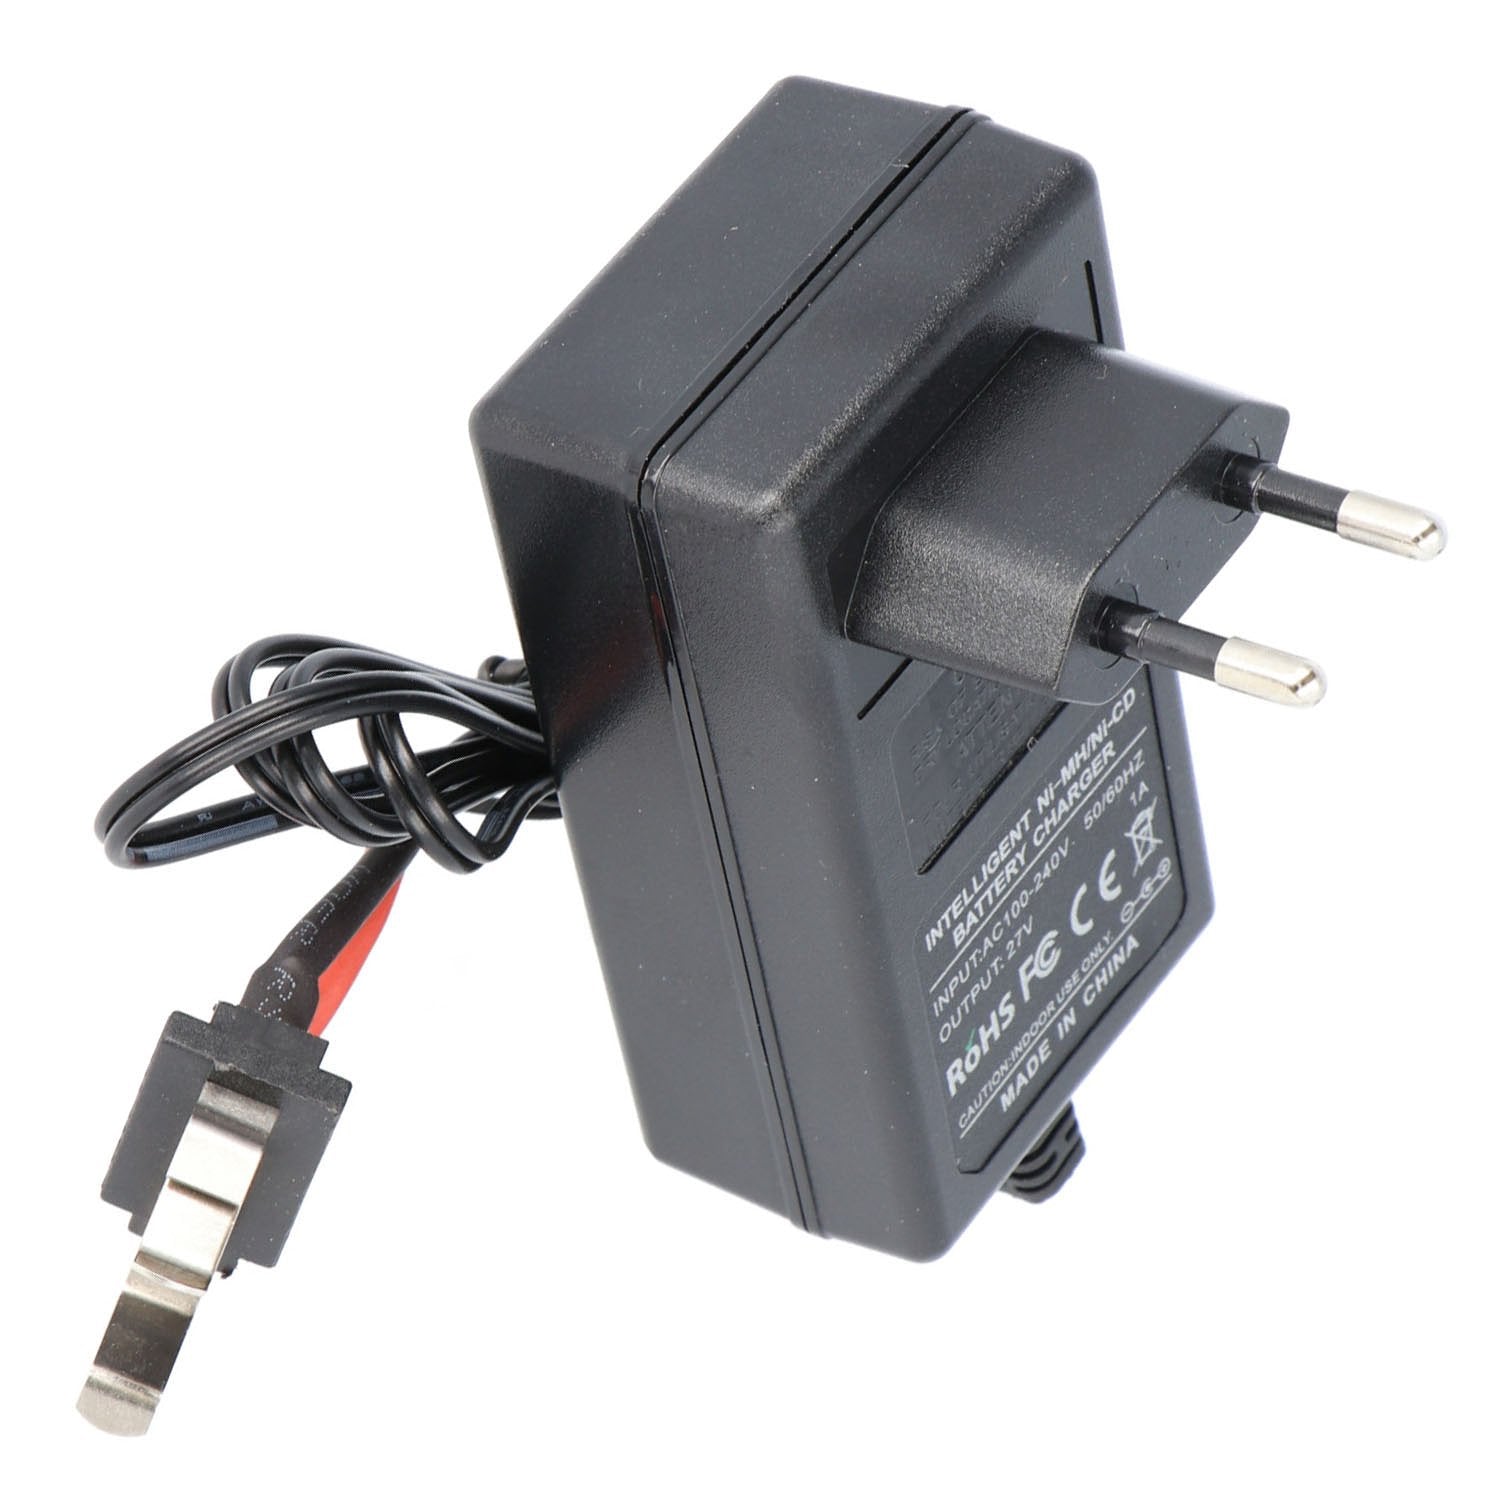 Quick charger suitable for the 7.2V battery Bosch 2607300001, 2607300002, 2607335178, 189.677, BH-72